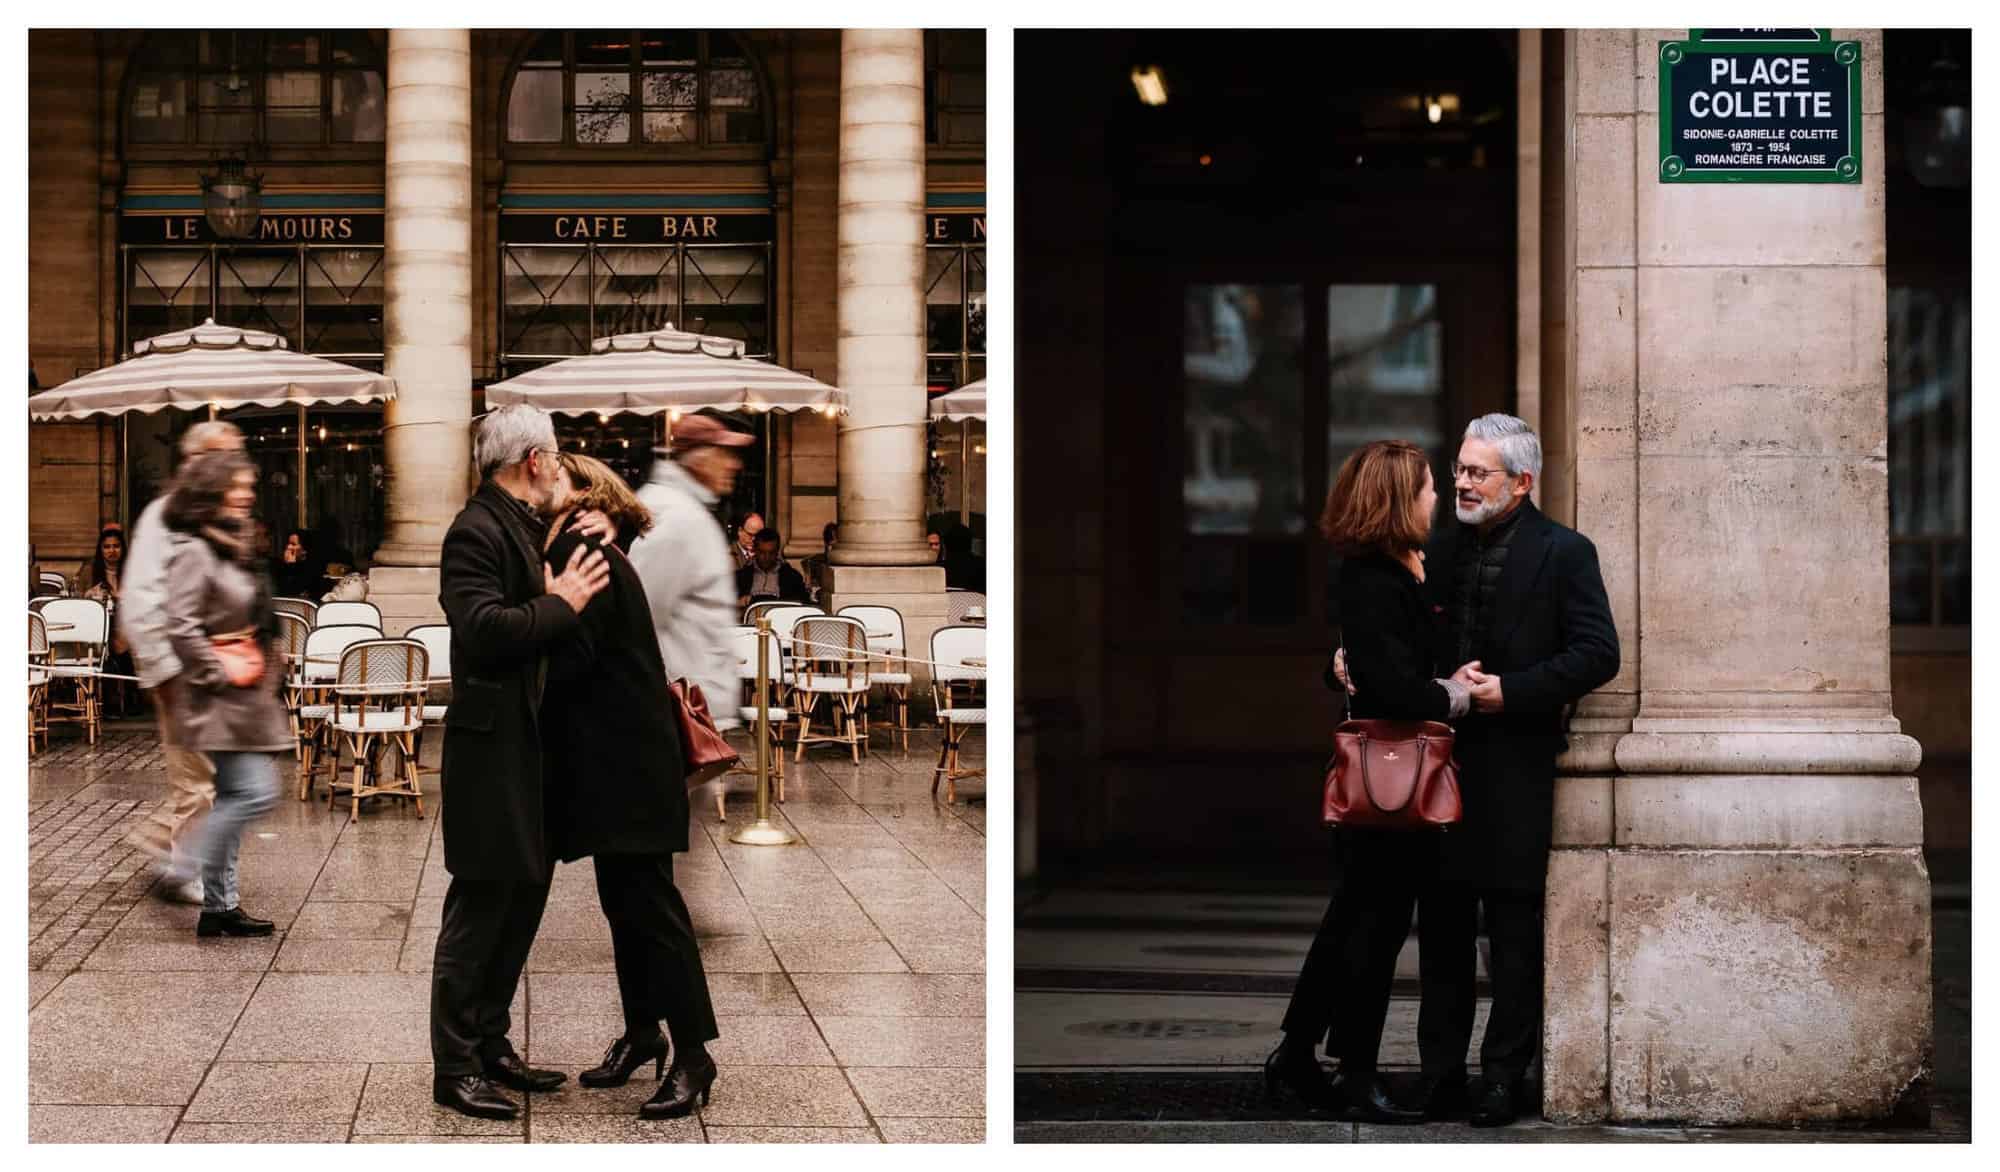 A man with gray hair and a woman with brown hair embrace on a street in Paris.